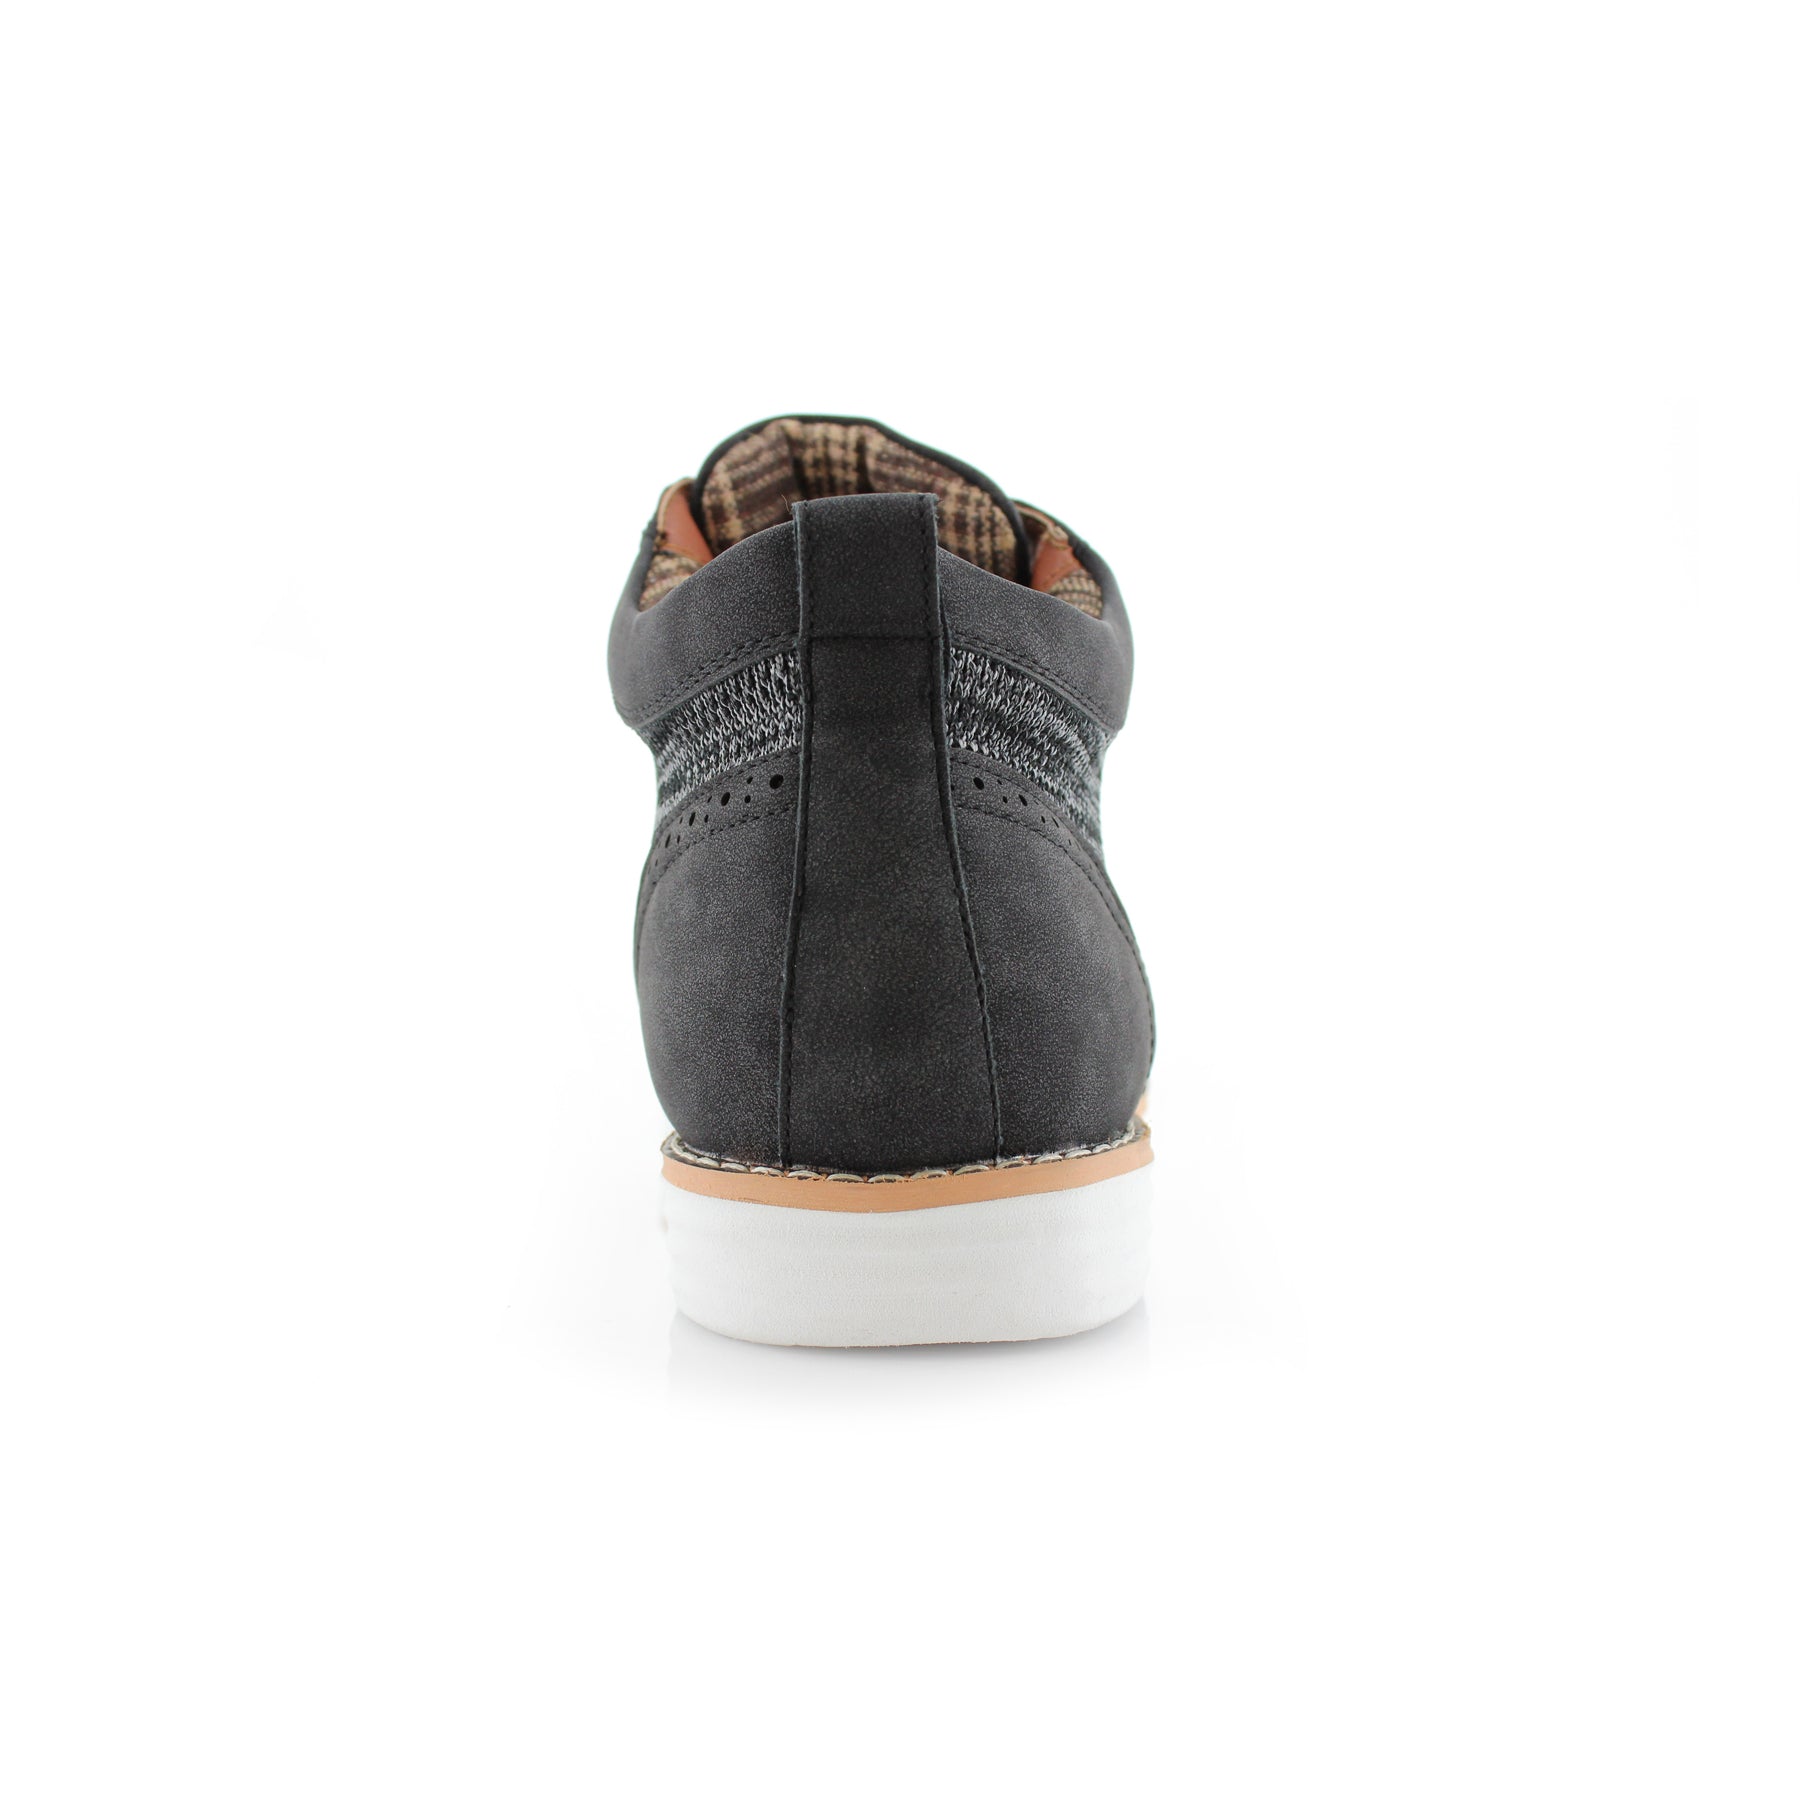 Duo-textured Mid-Top Wingtip Sneaker | Colbert by Polar Fox | Conal Footwear | Back Angle View